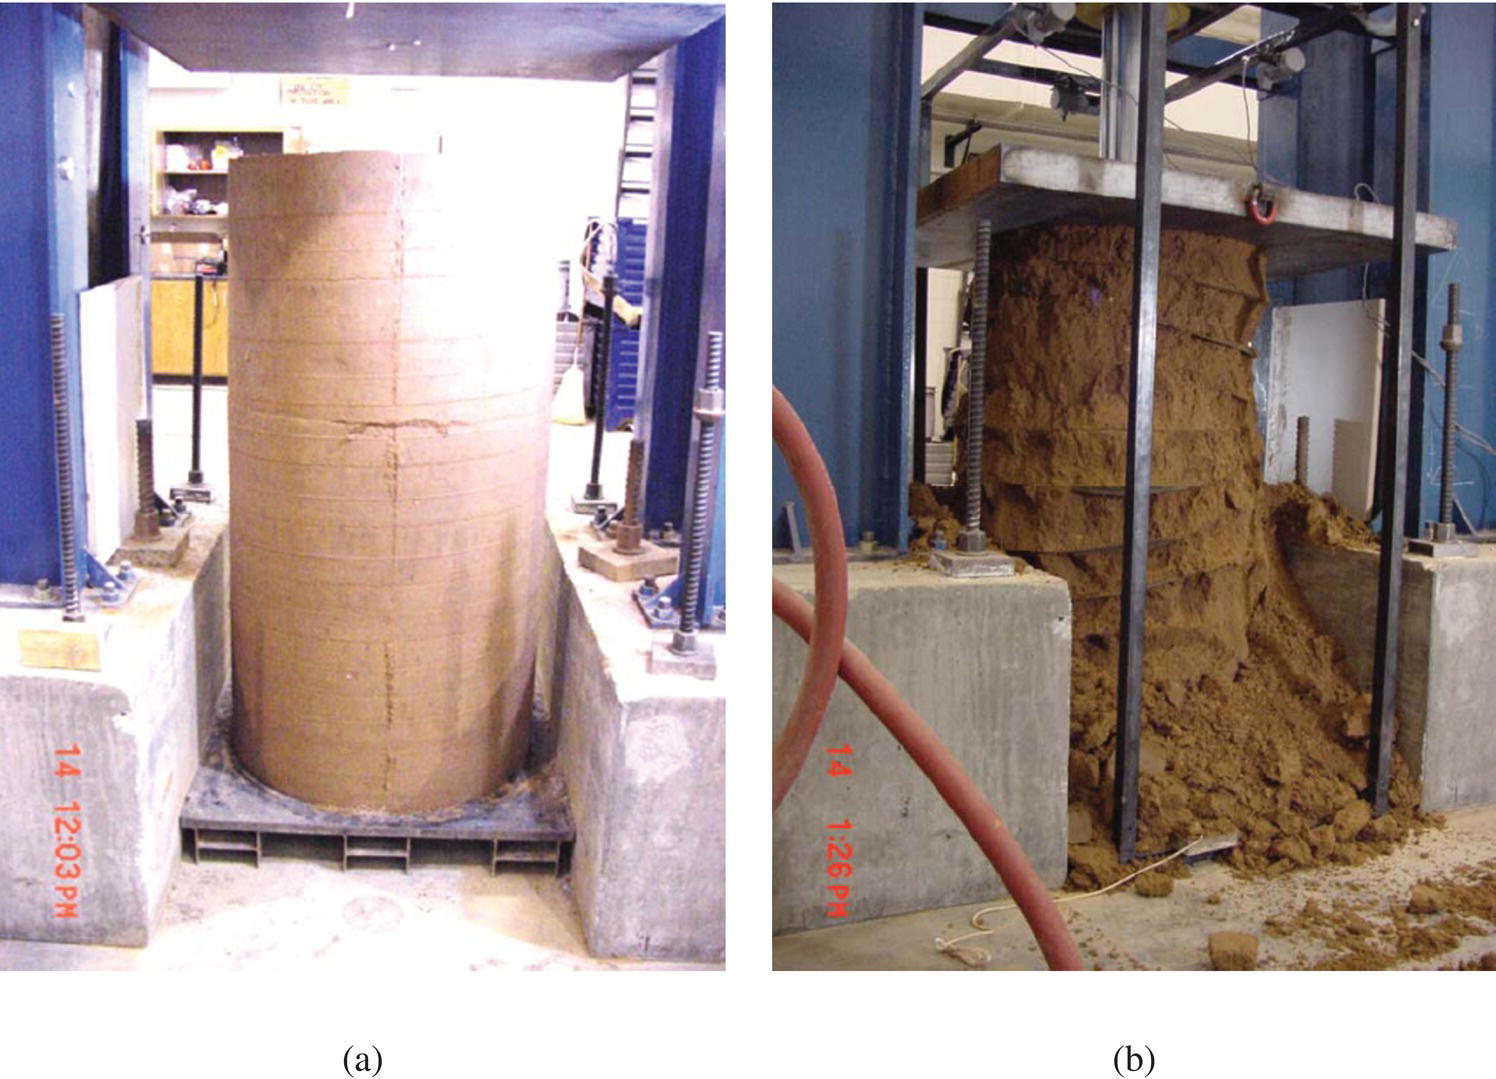 Photos displaying soil–geosynthetic composite cylindrical specimen in unconfined compression test (a) before loading and (b) at failure.